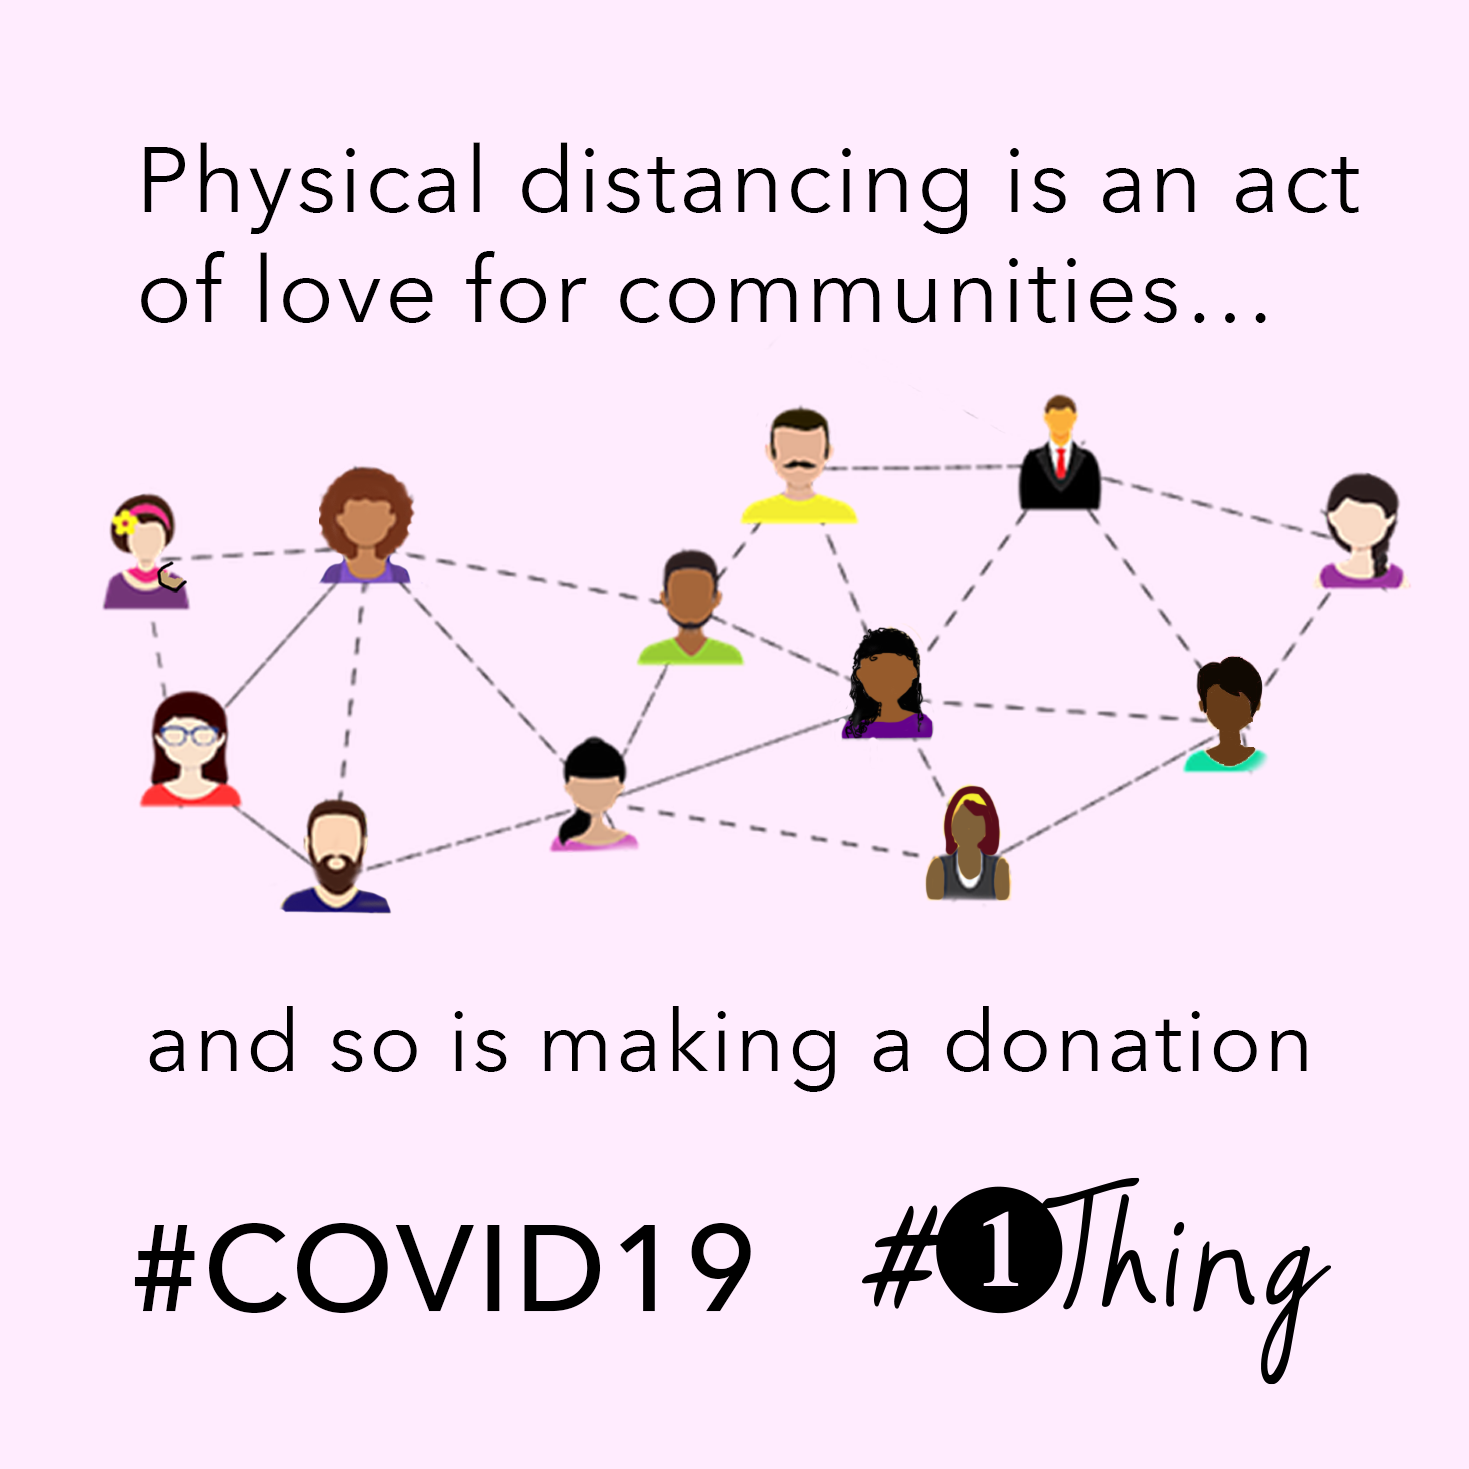 physical distancing is an act of love for communities...and so is making a donation.